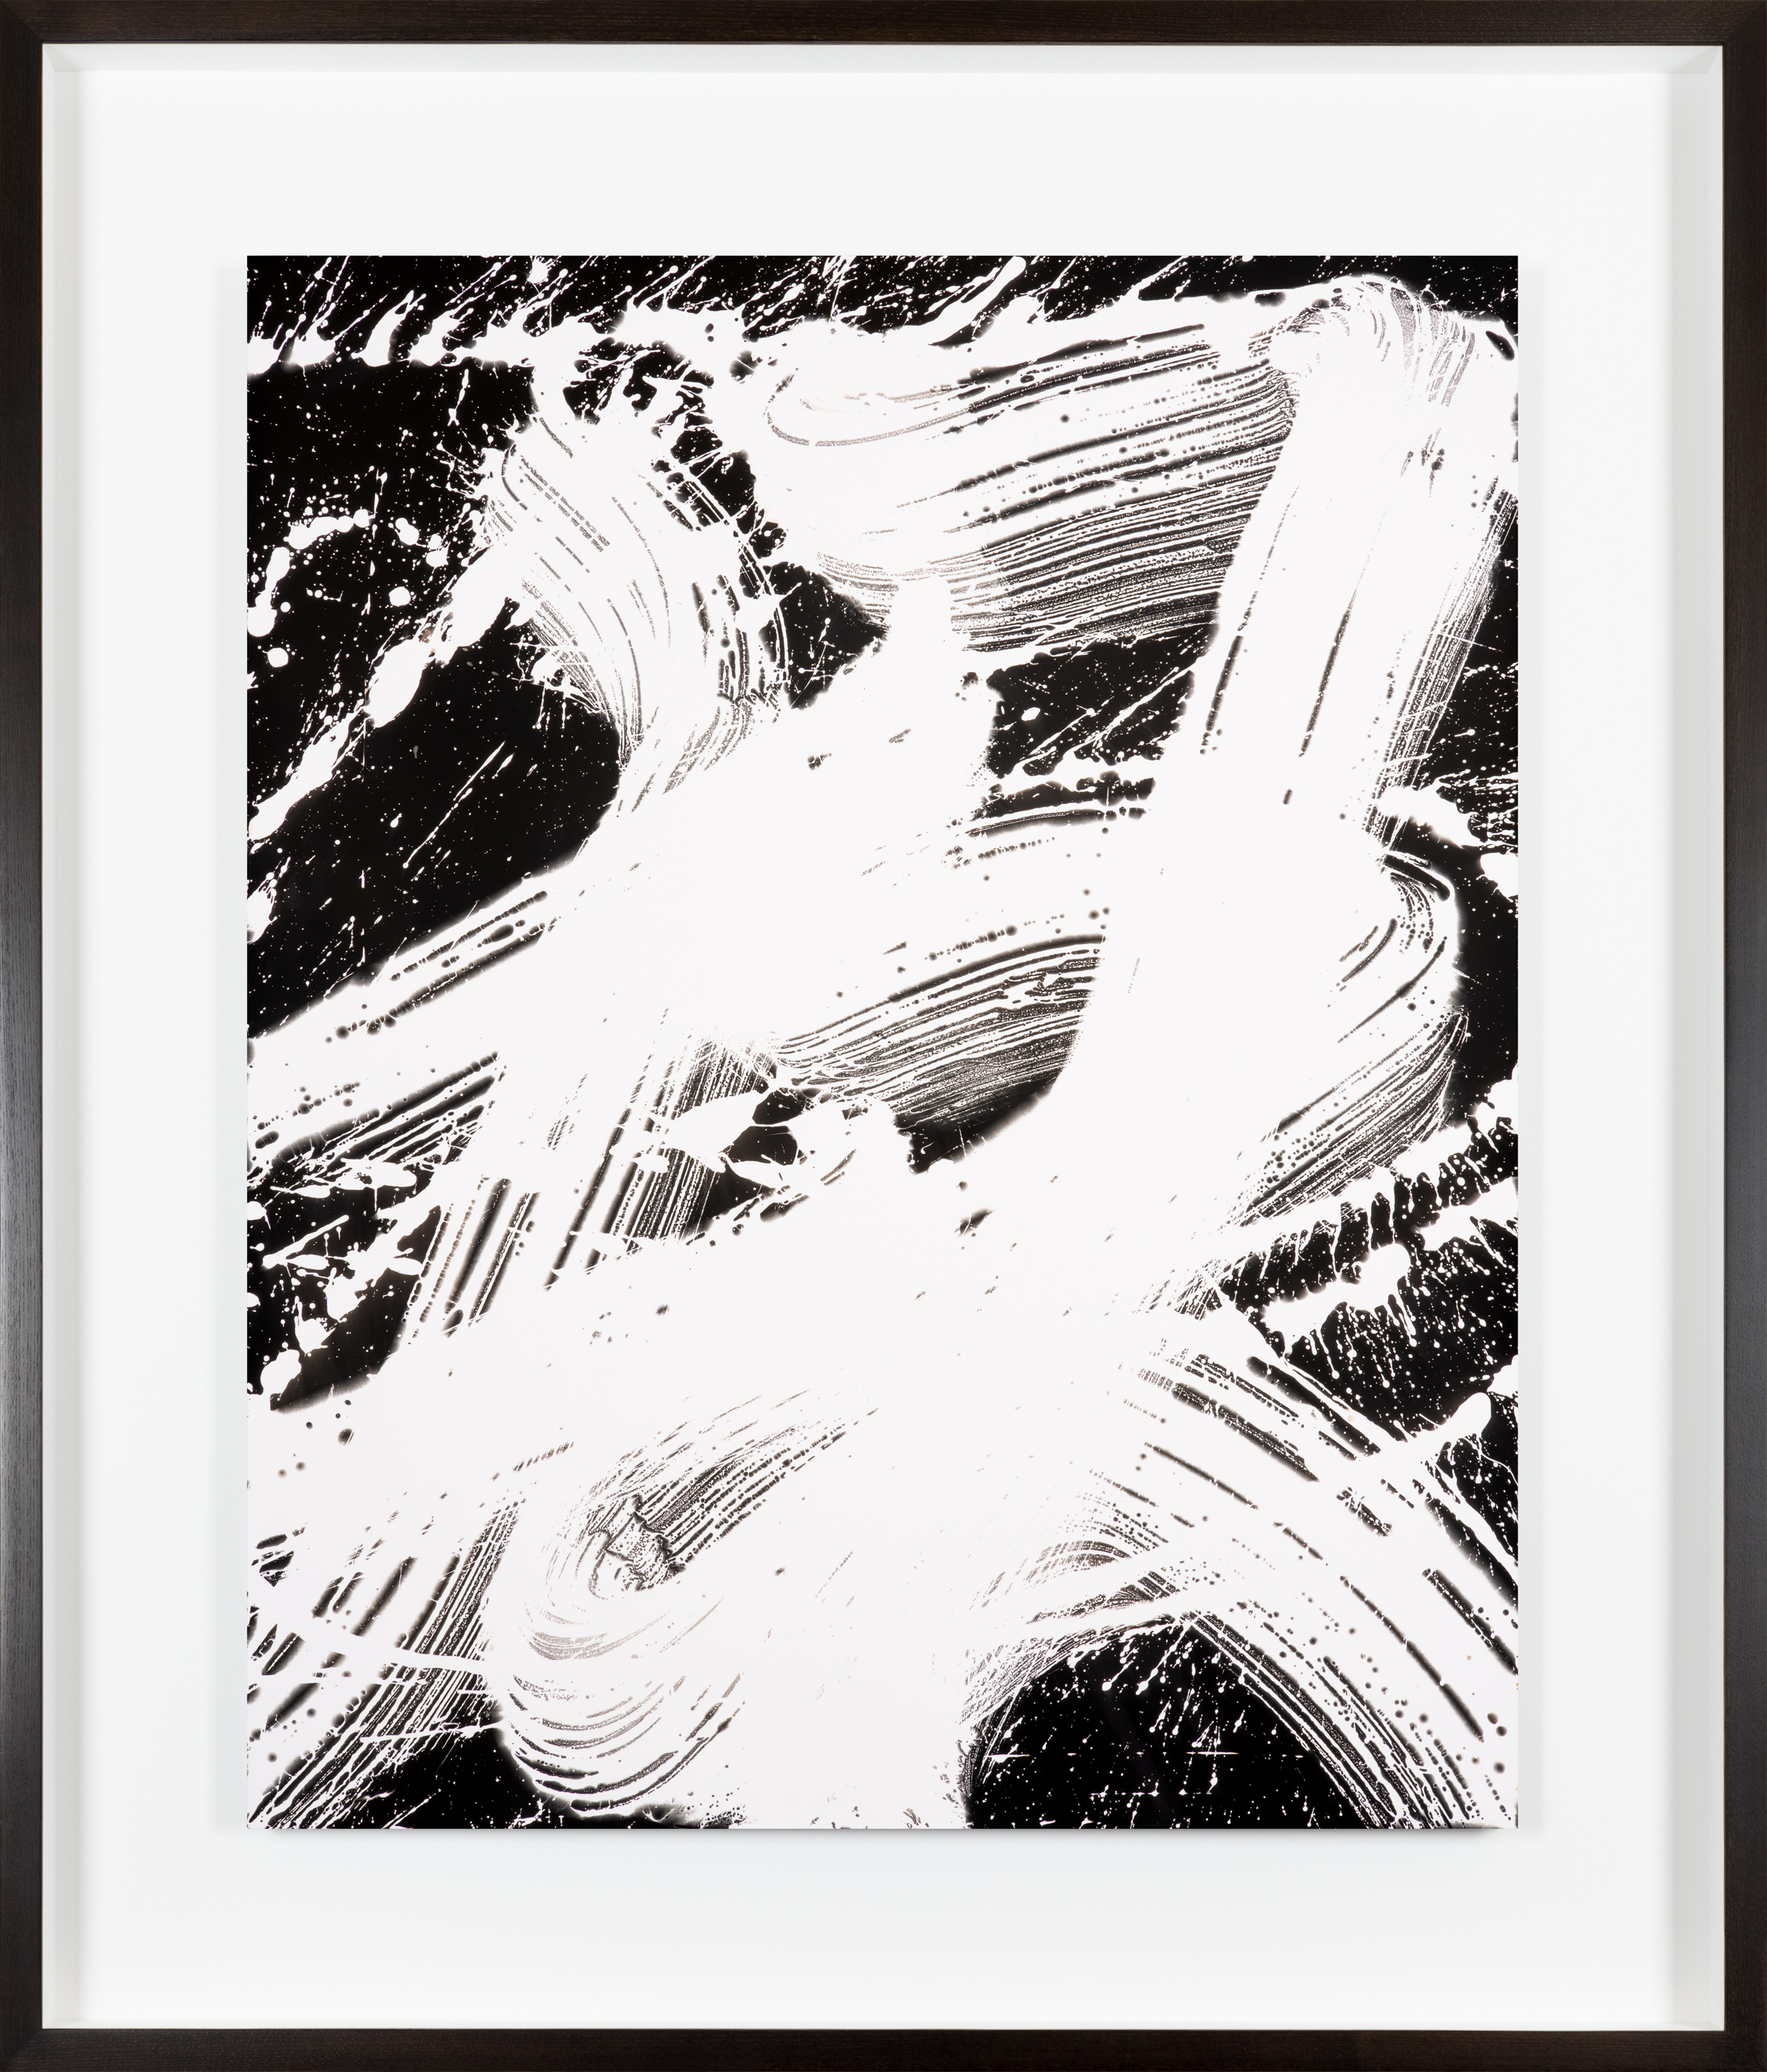 A color image of a framed artwork depicting white expressive brush strokes painted on a black background